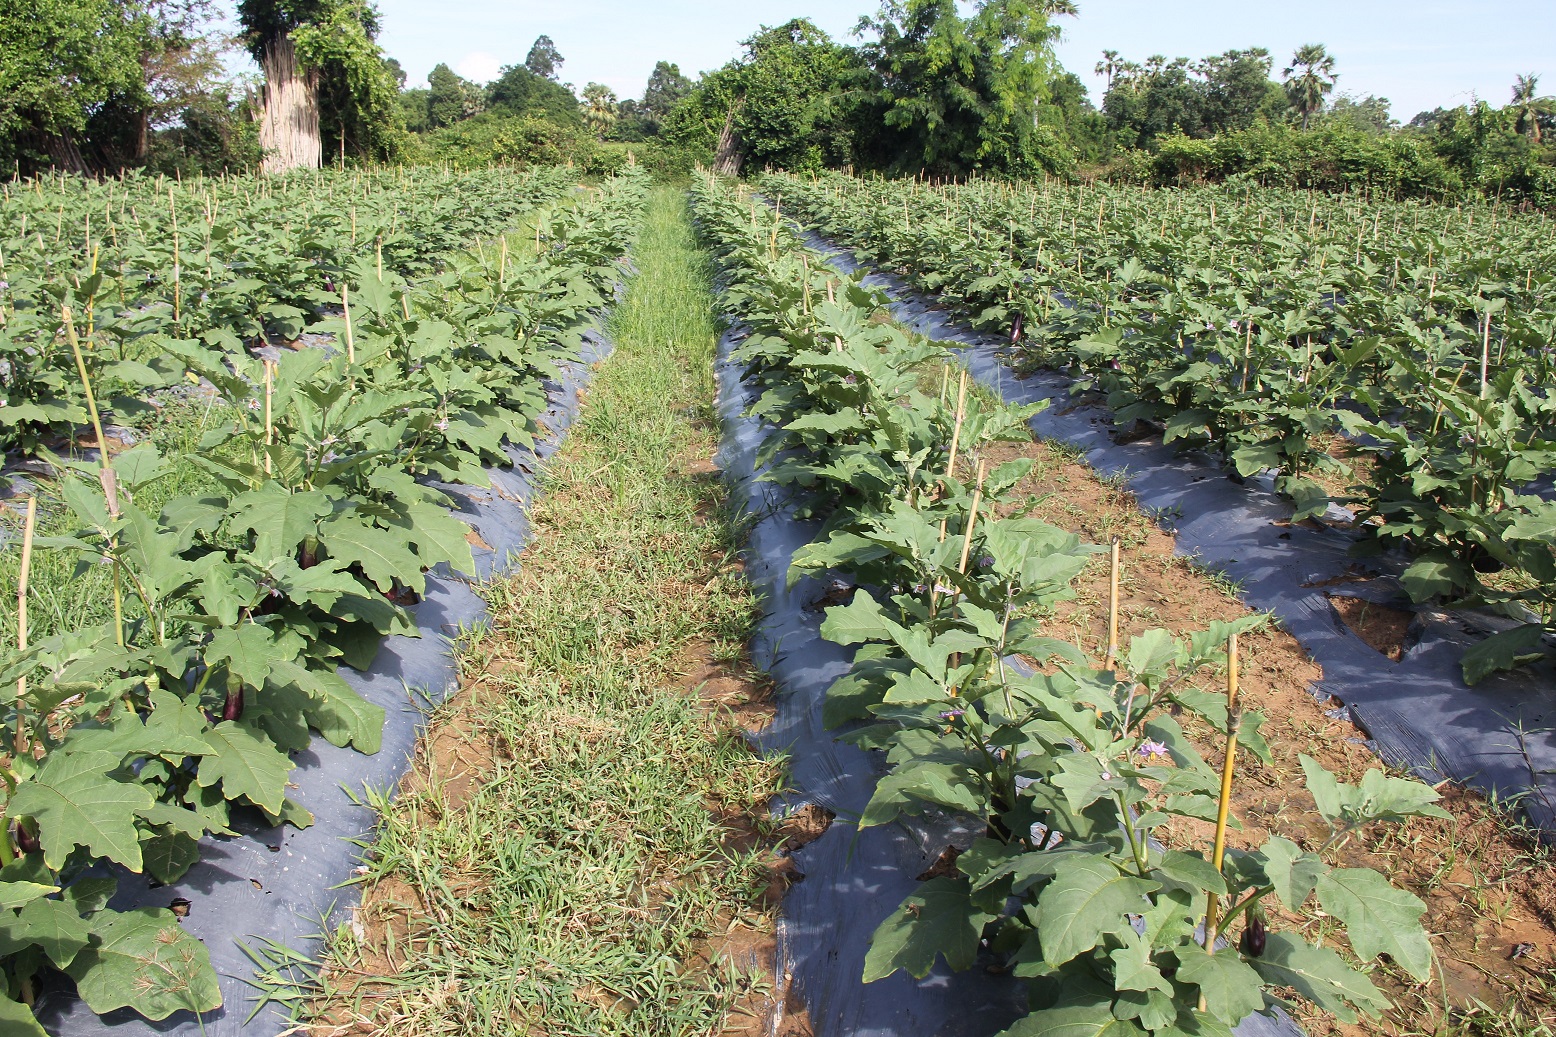 Eggplants cultivation by using plastic mulches and set the drip irrigation on the row under the plastic.